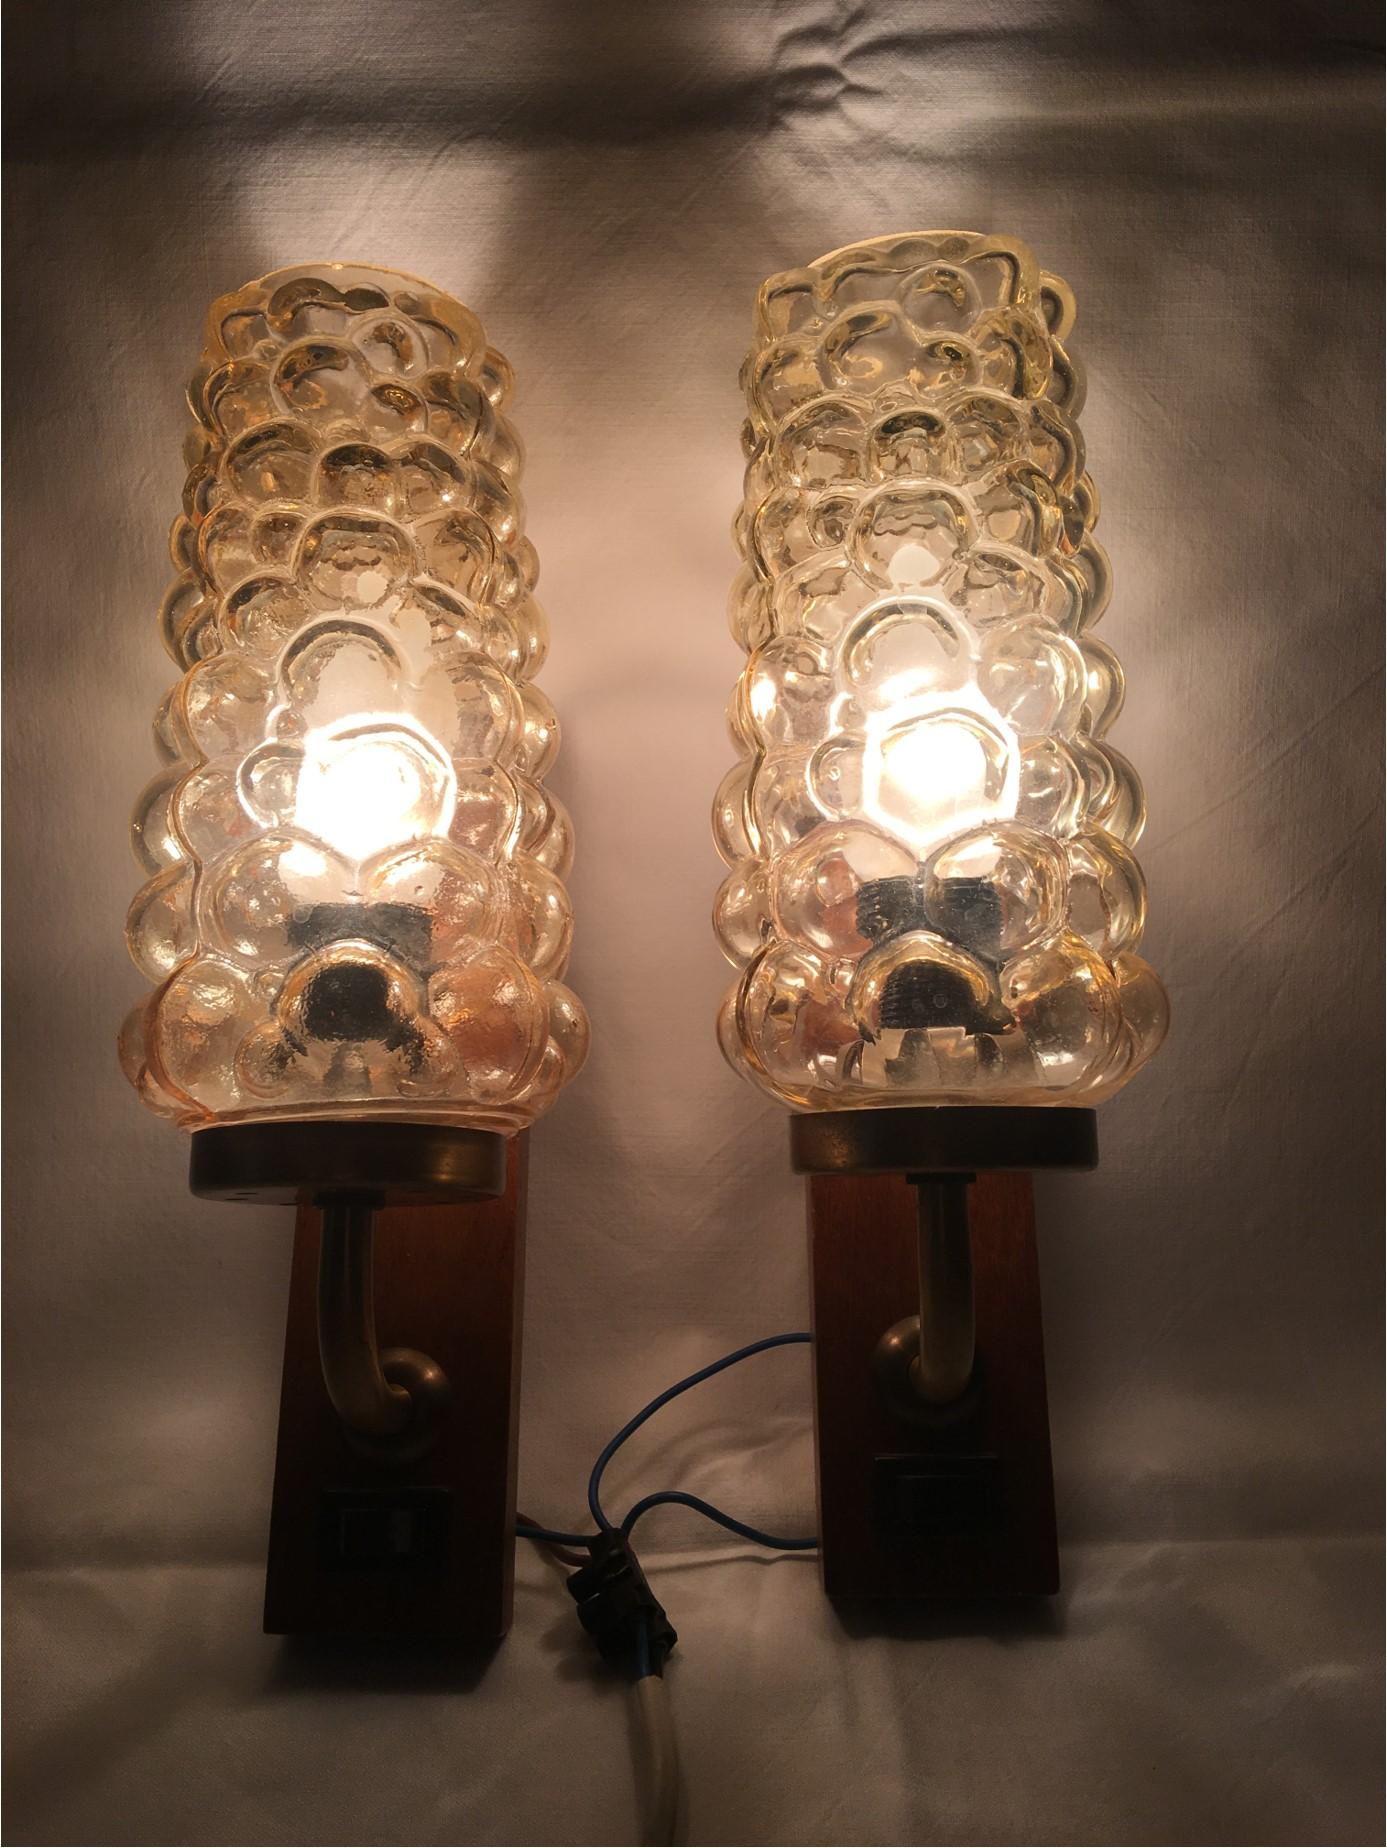 A set of lovely Helena Tynell style bubble glass sconces. Mounted on a petite wooden base with on and off switches. The copper arm is crowned with a pretty bubble glass cover producing lovely lighting effects. Each fixture requires one European E 14